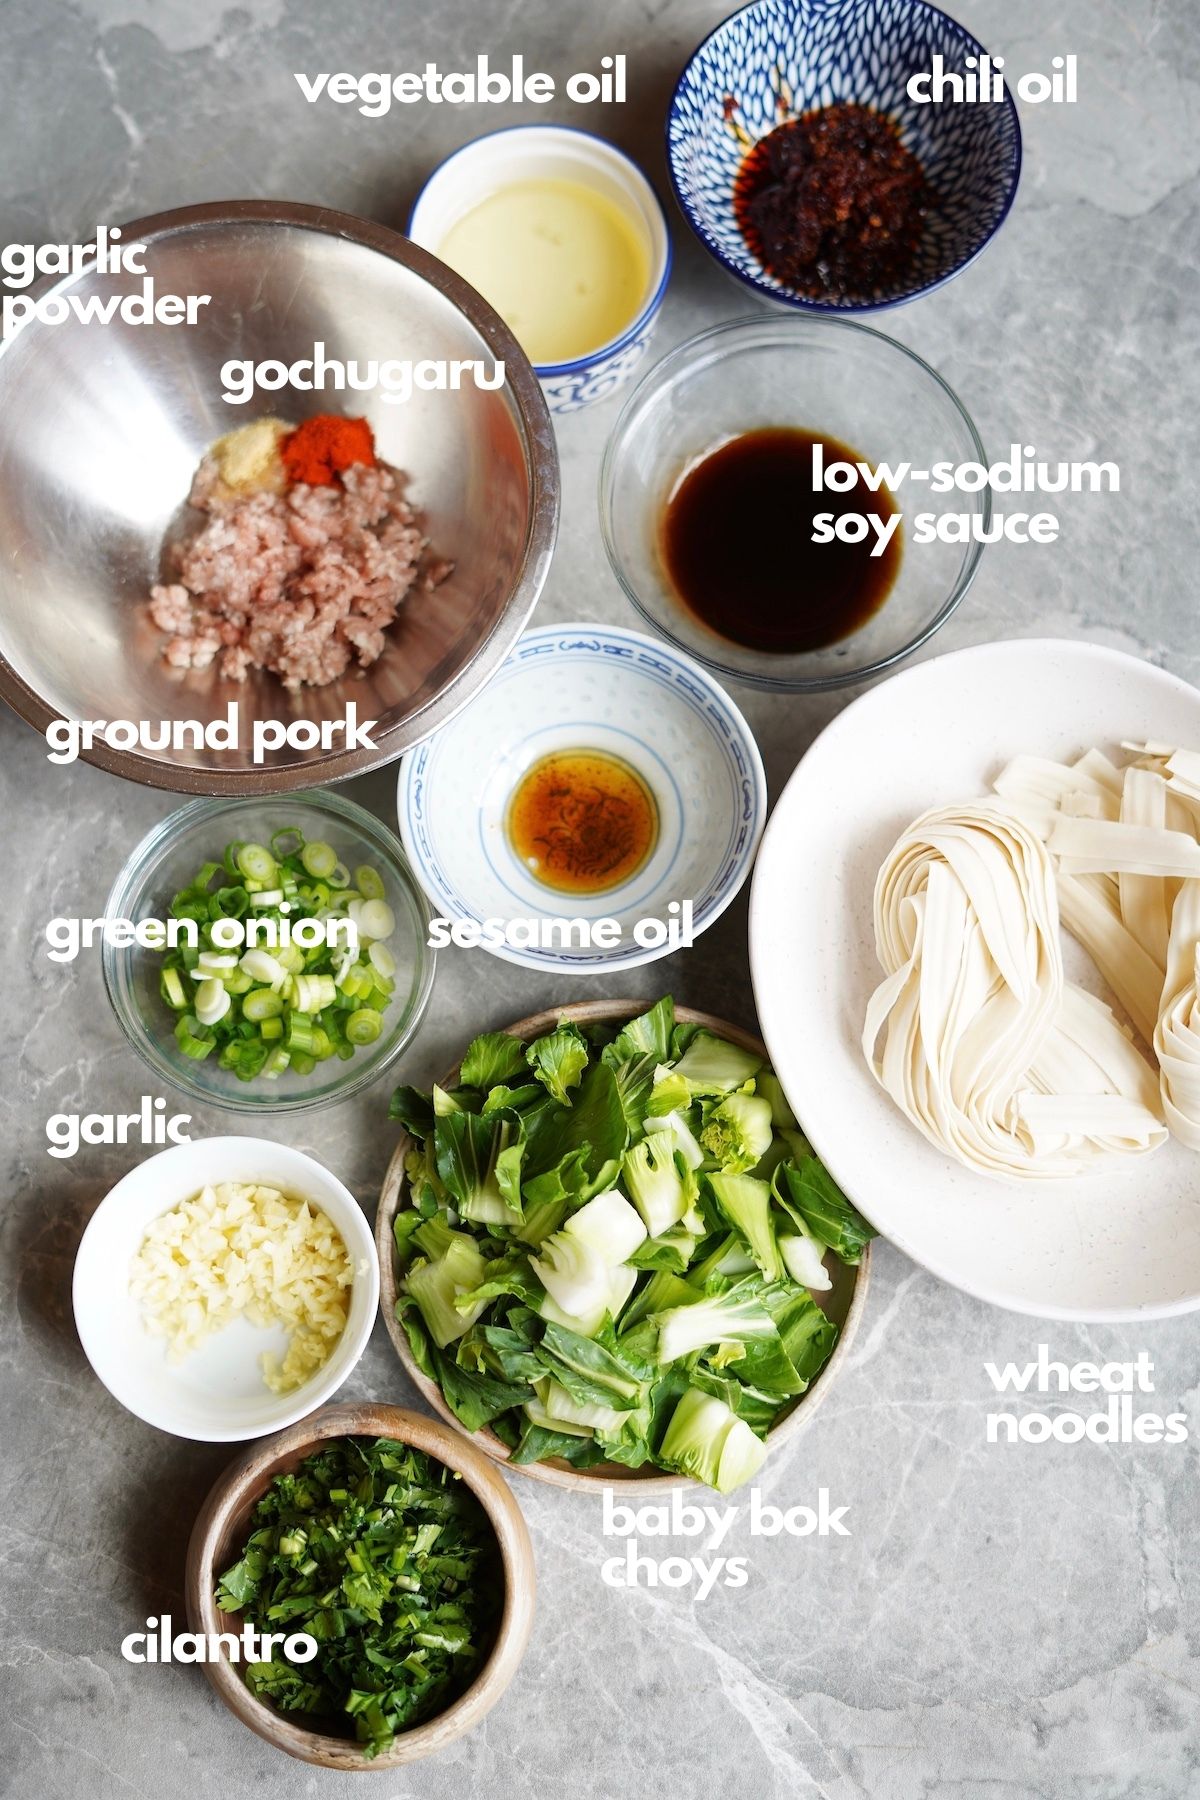 Overview of ingredients for garlic chili oil noodles